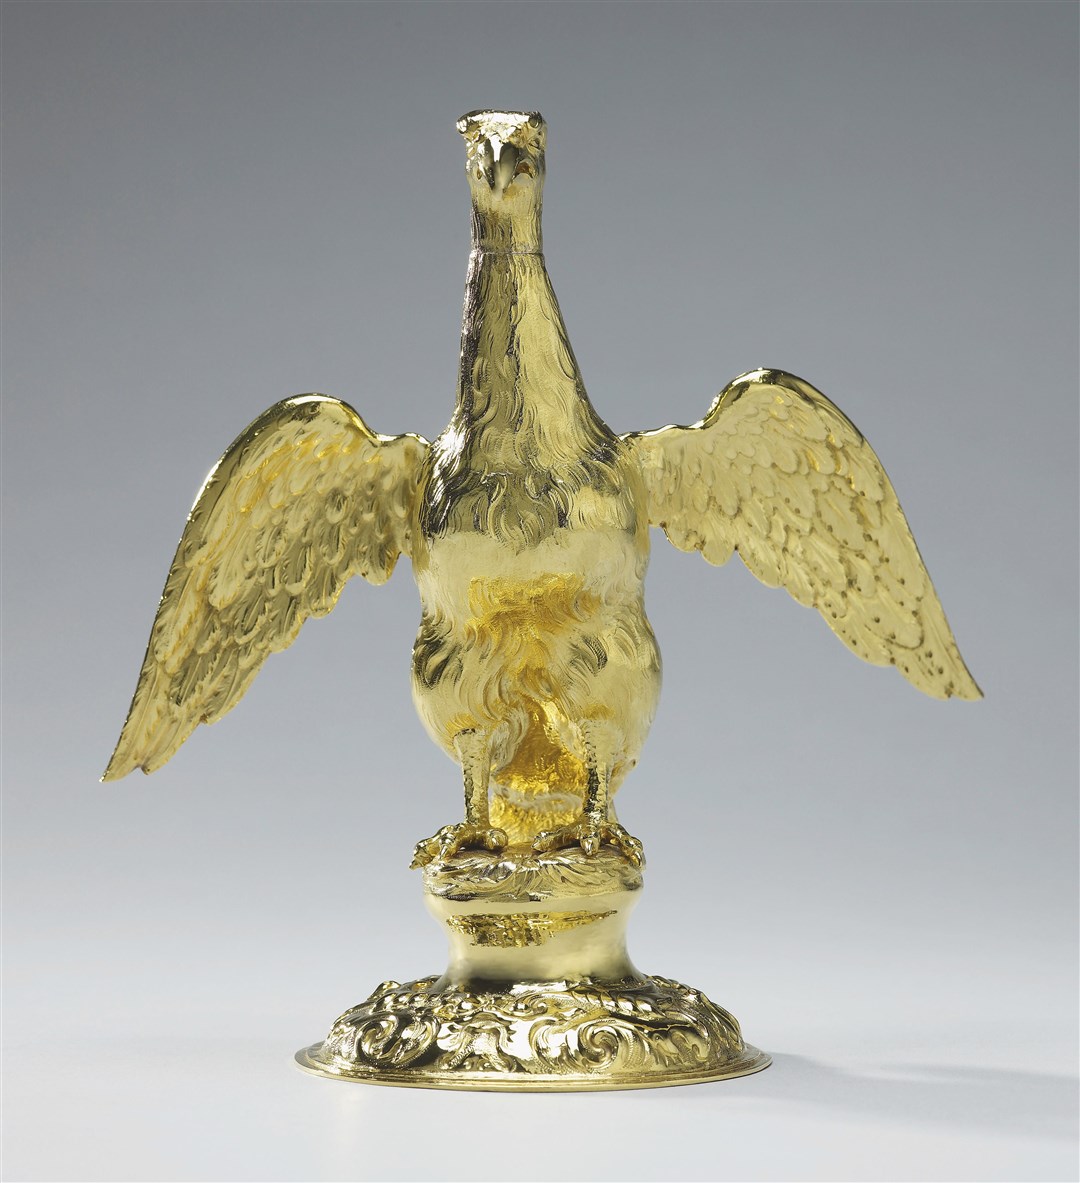 The Ampulla (Royal Collection Trust/HM King Charles III/PA)